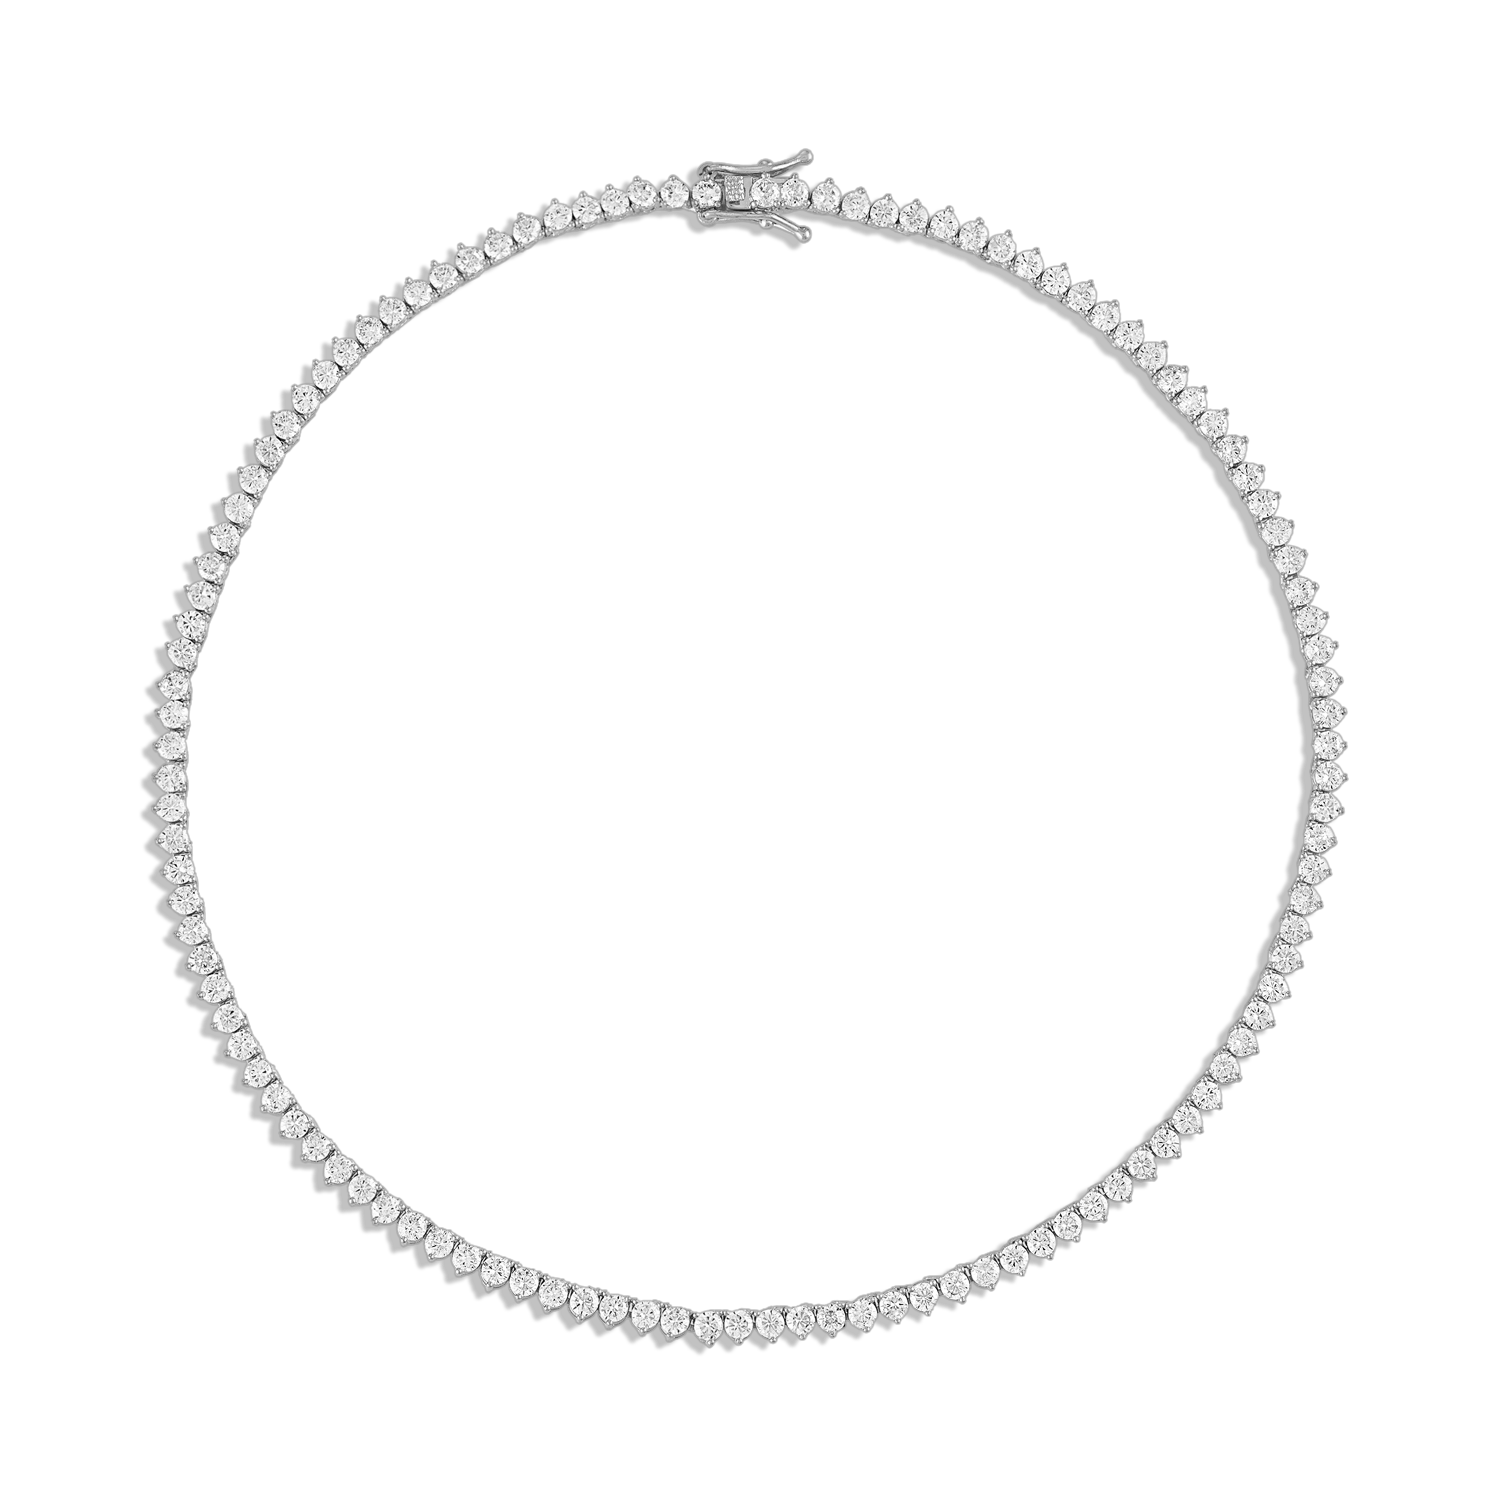 Cubic Zirconia Graduating Tennis Necklace in Solid Sterling Silver | Banter